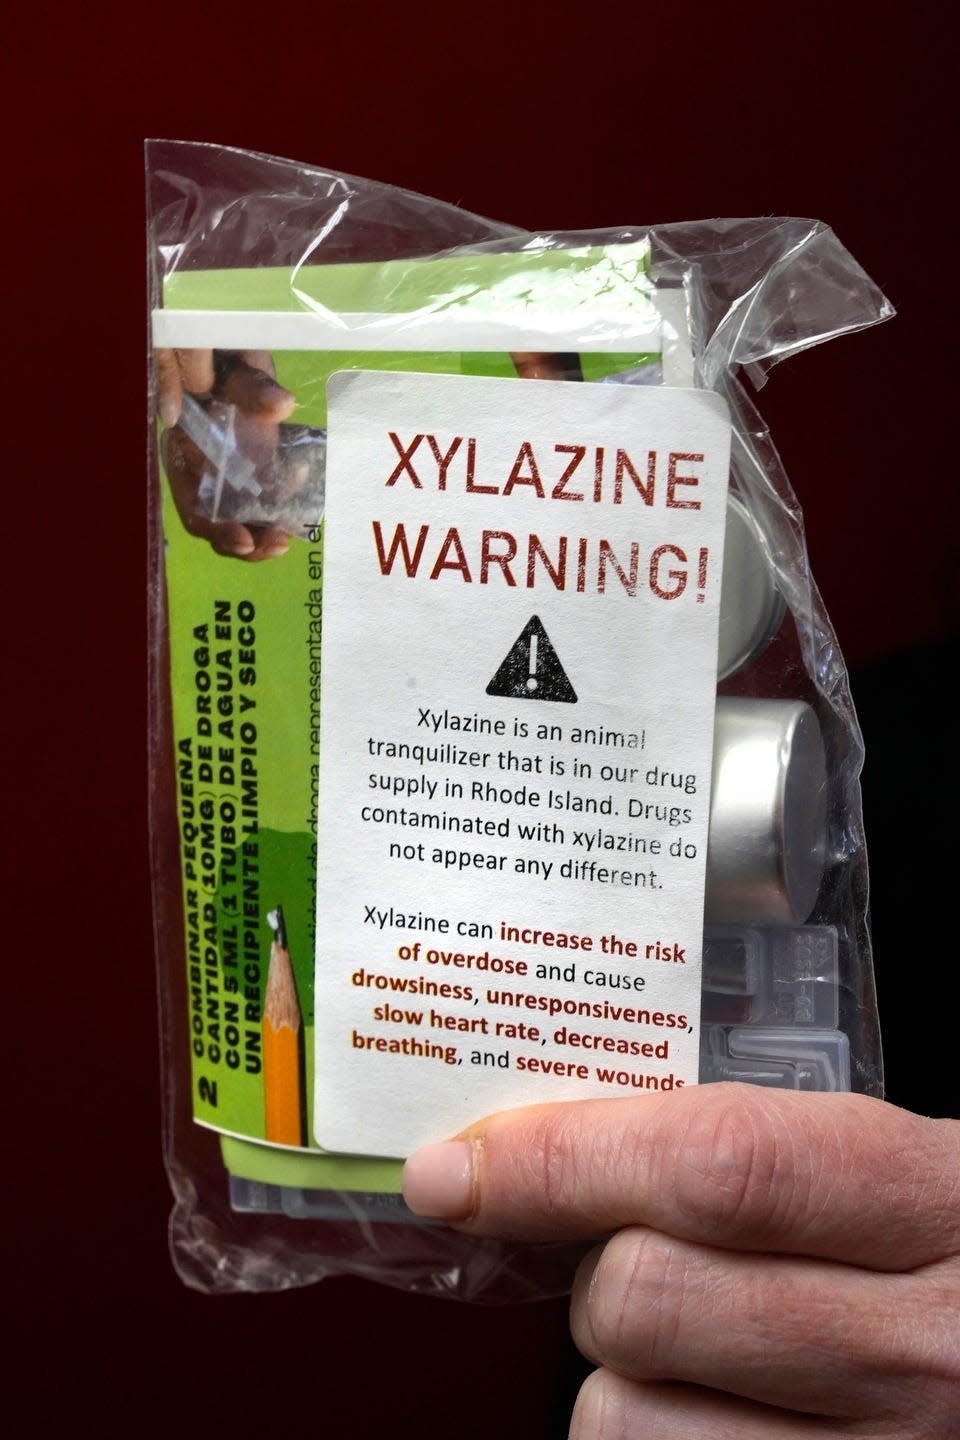 The U.S. Drug Enforcement Administration is warning the American public of a sharp increase in the trafficking of fentanyl mixed with xylazine. Xylazine, also known as “tranq,” is a powerful sedative that the U.S. Food and Drug Administration has approved for veterinary use.